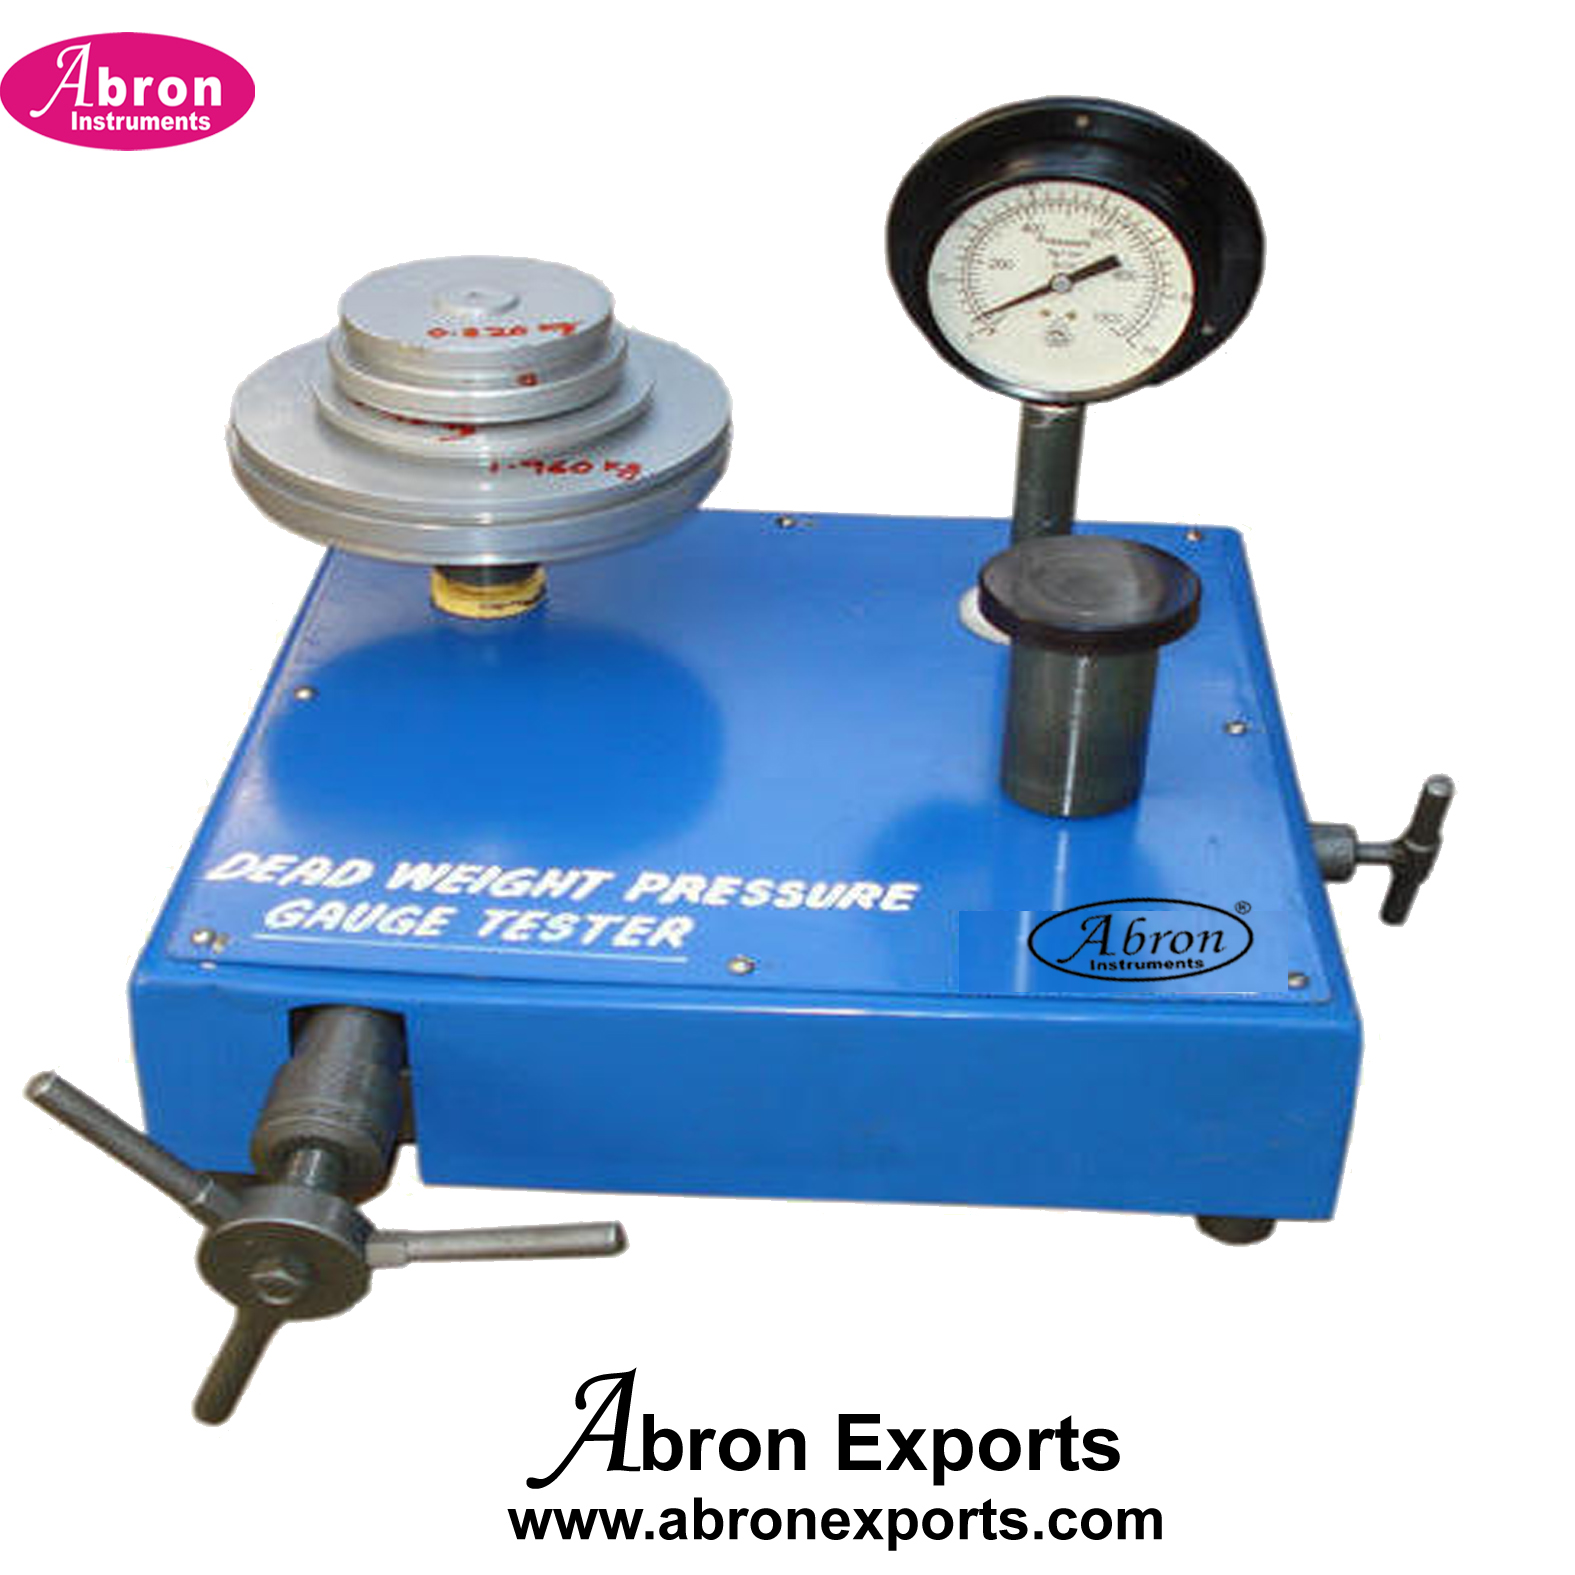 Mechenical lab dead weight pressure gauge tester new Abron AE-8401DWT 